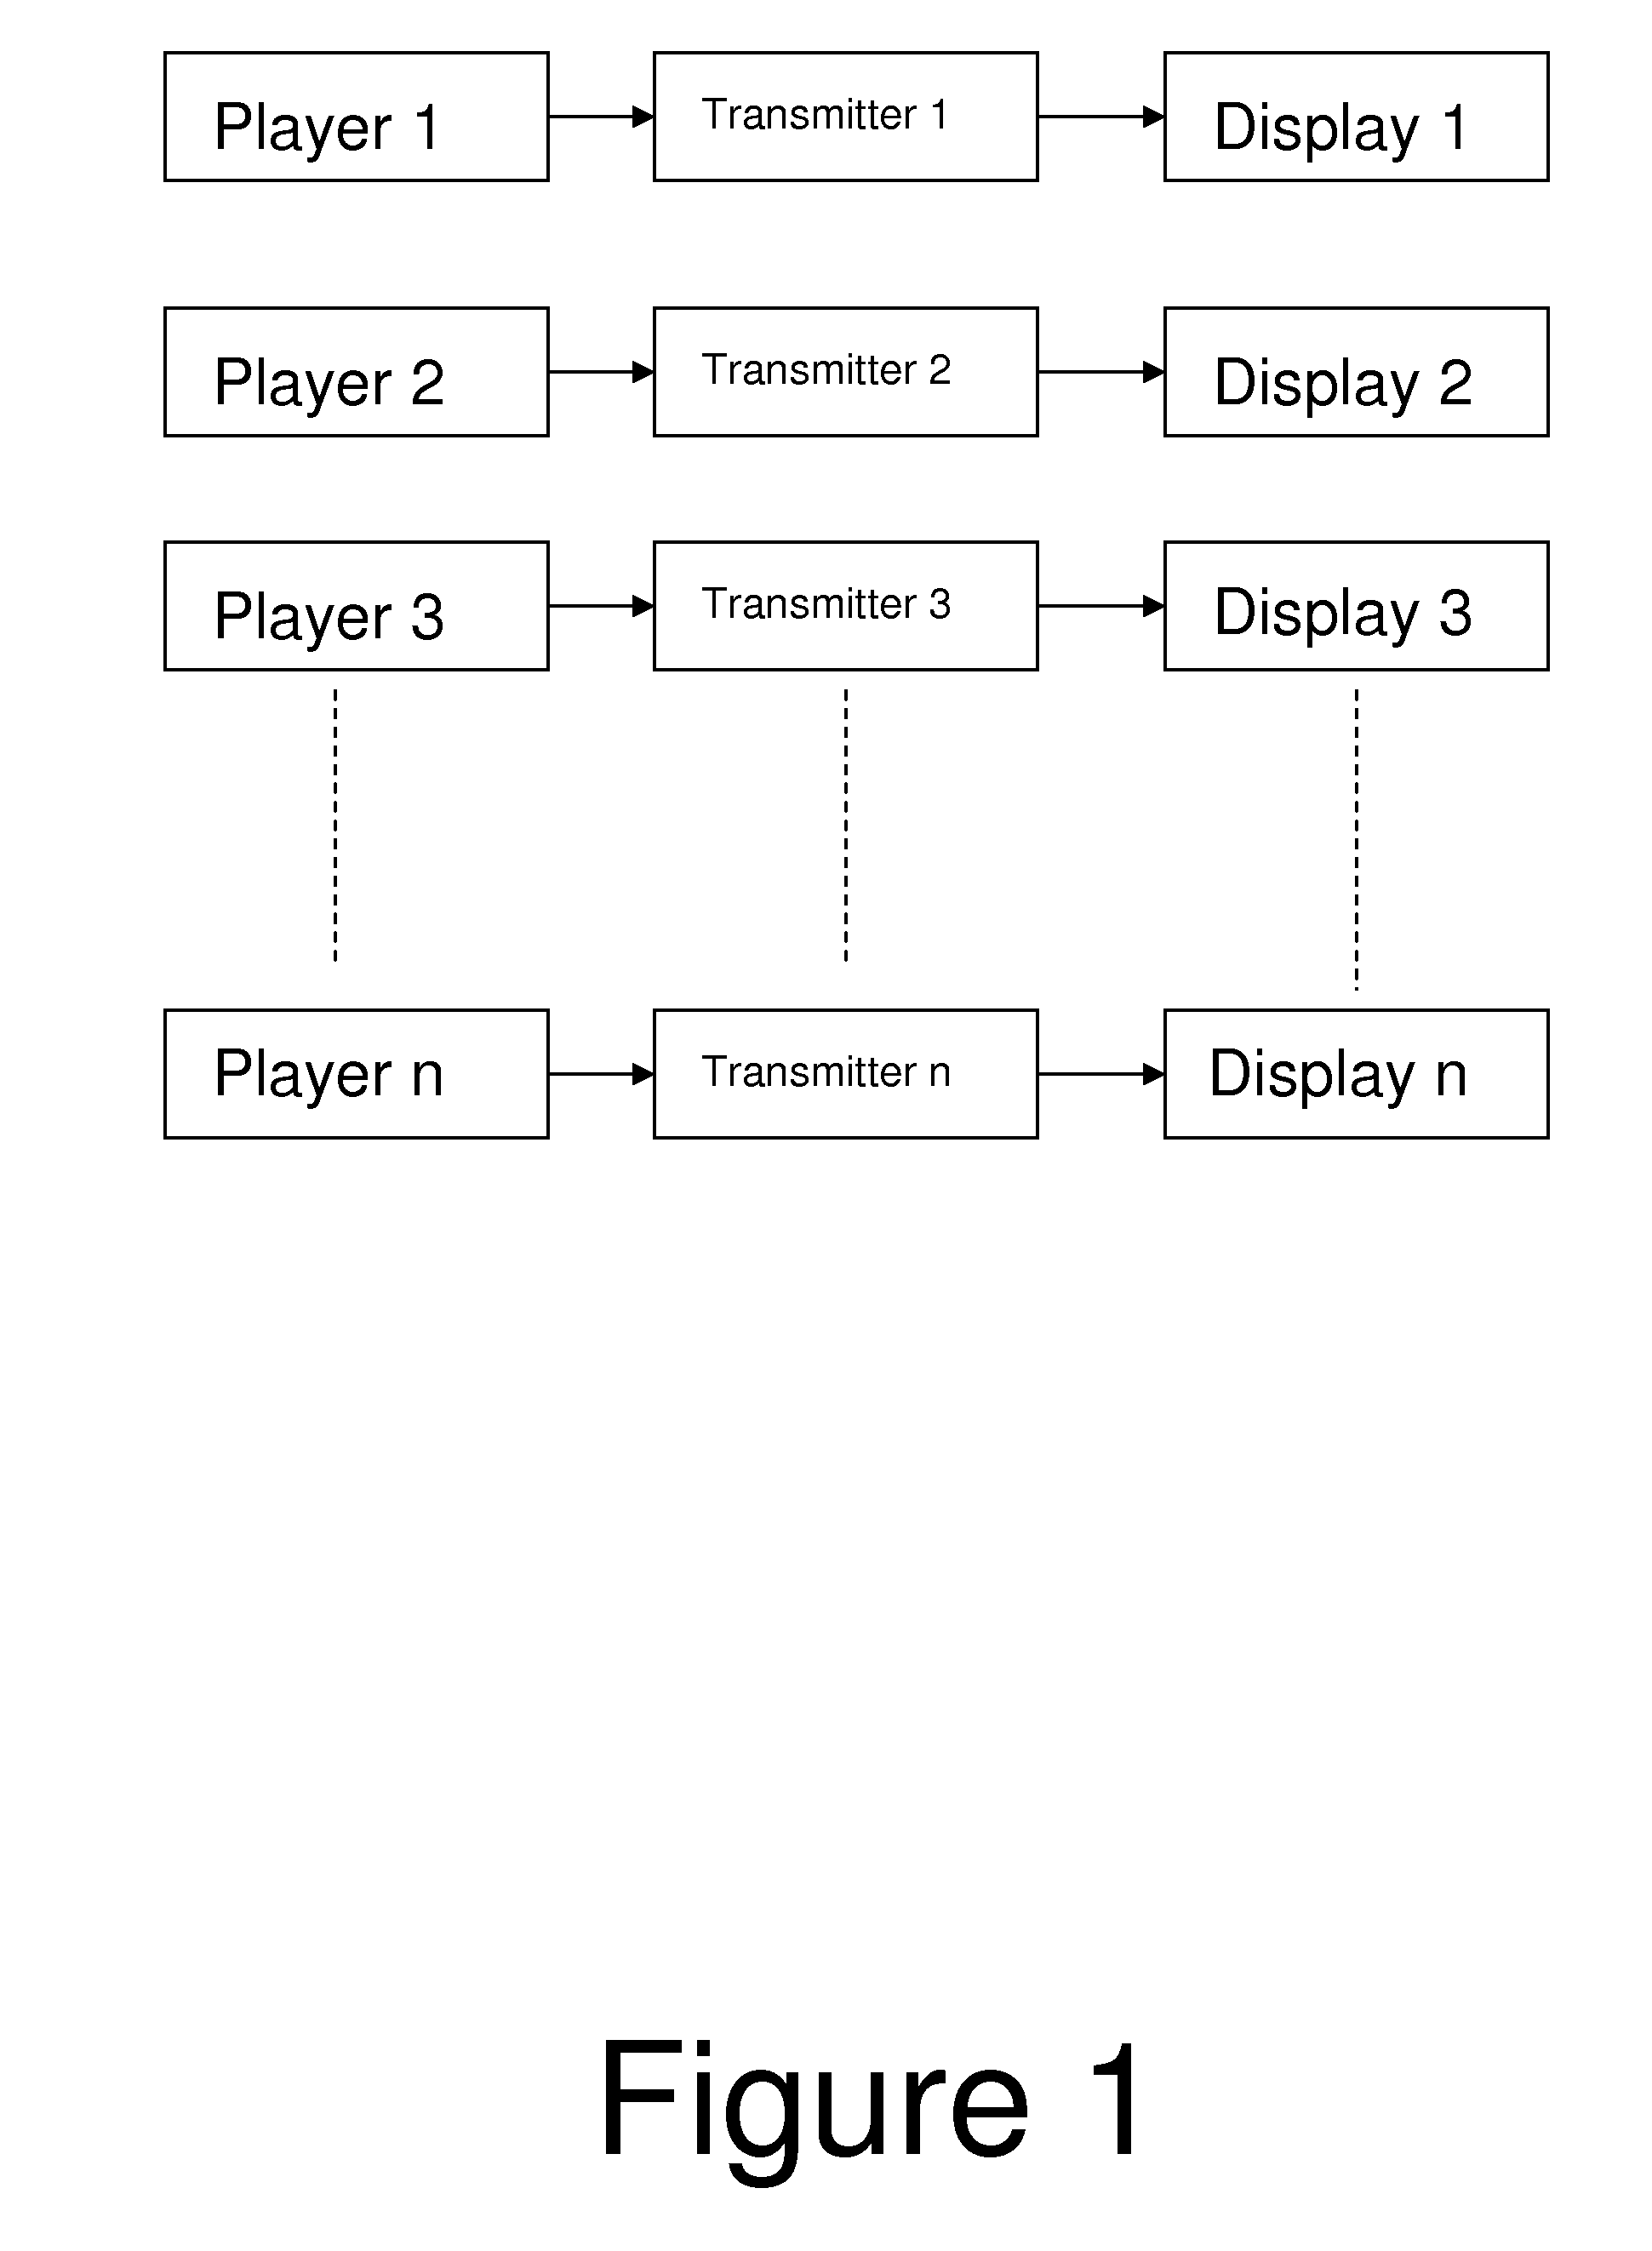 System for supplying varying content to multiple displays using a single player